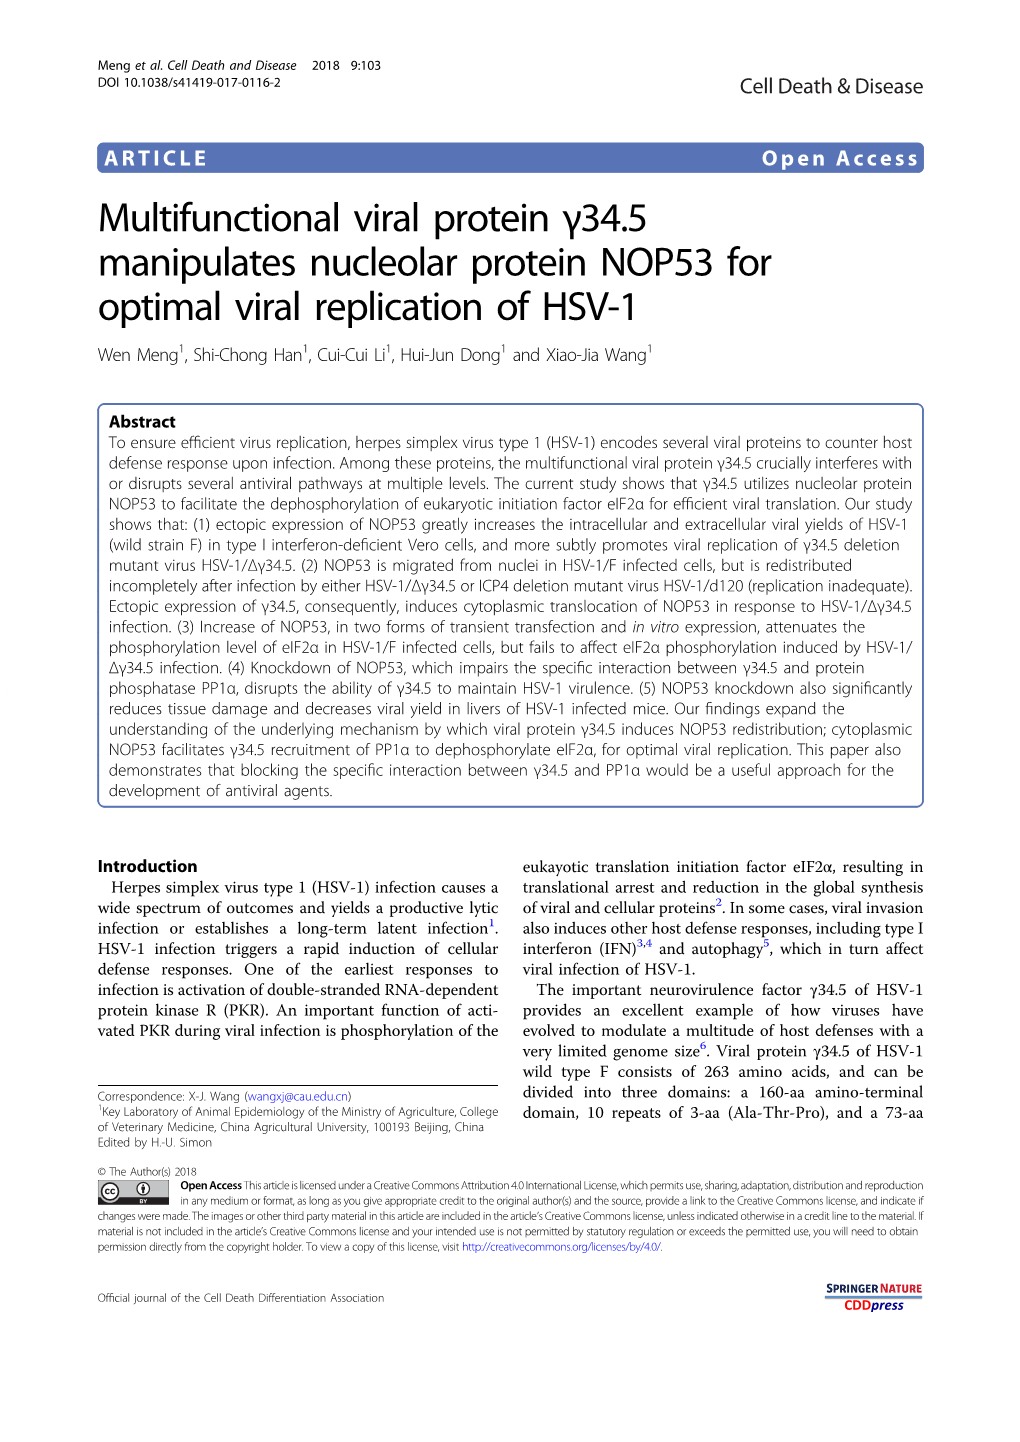 Multifunctional Viral Protein Î³34.5 Manipulates Nucleolar Protein